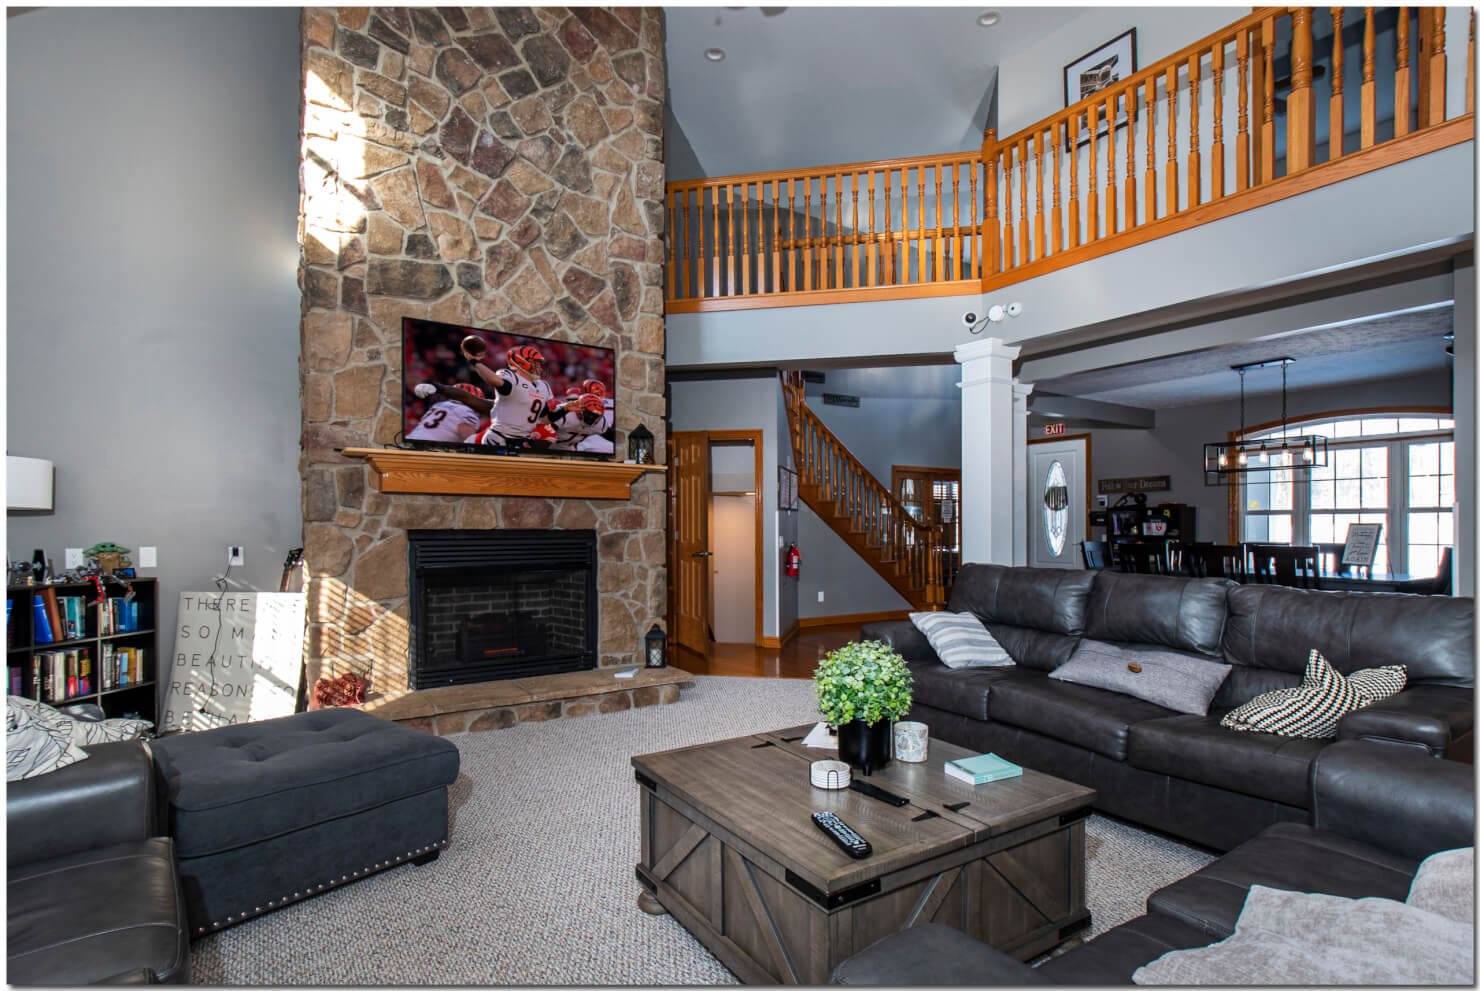 A living room with a stone fireplace and a flat screen tv, perfect for cozy evenings and entertainment.